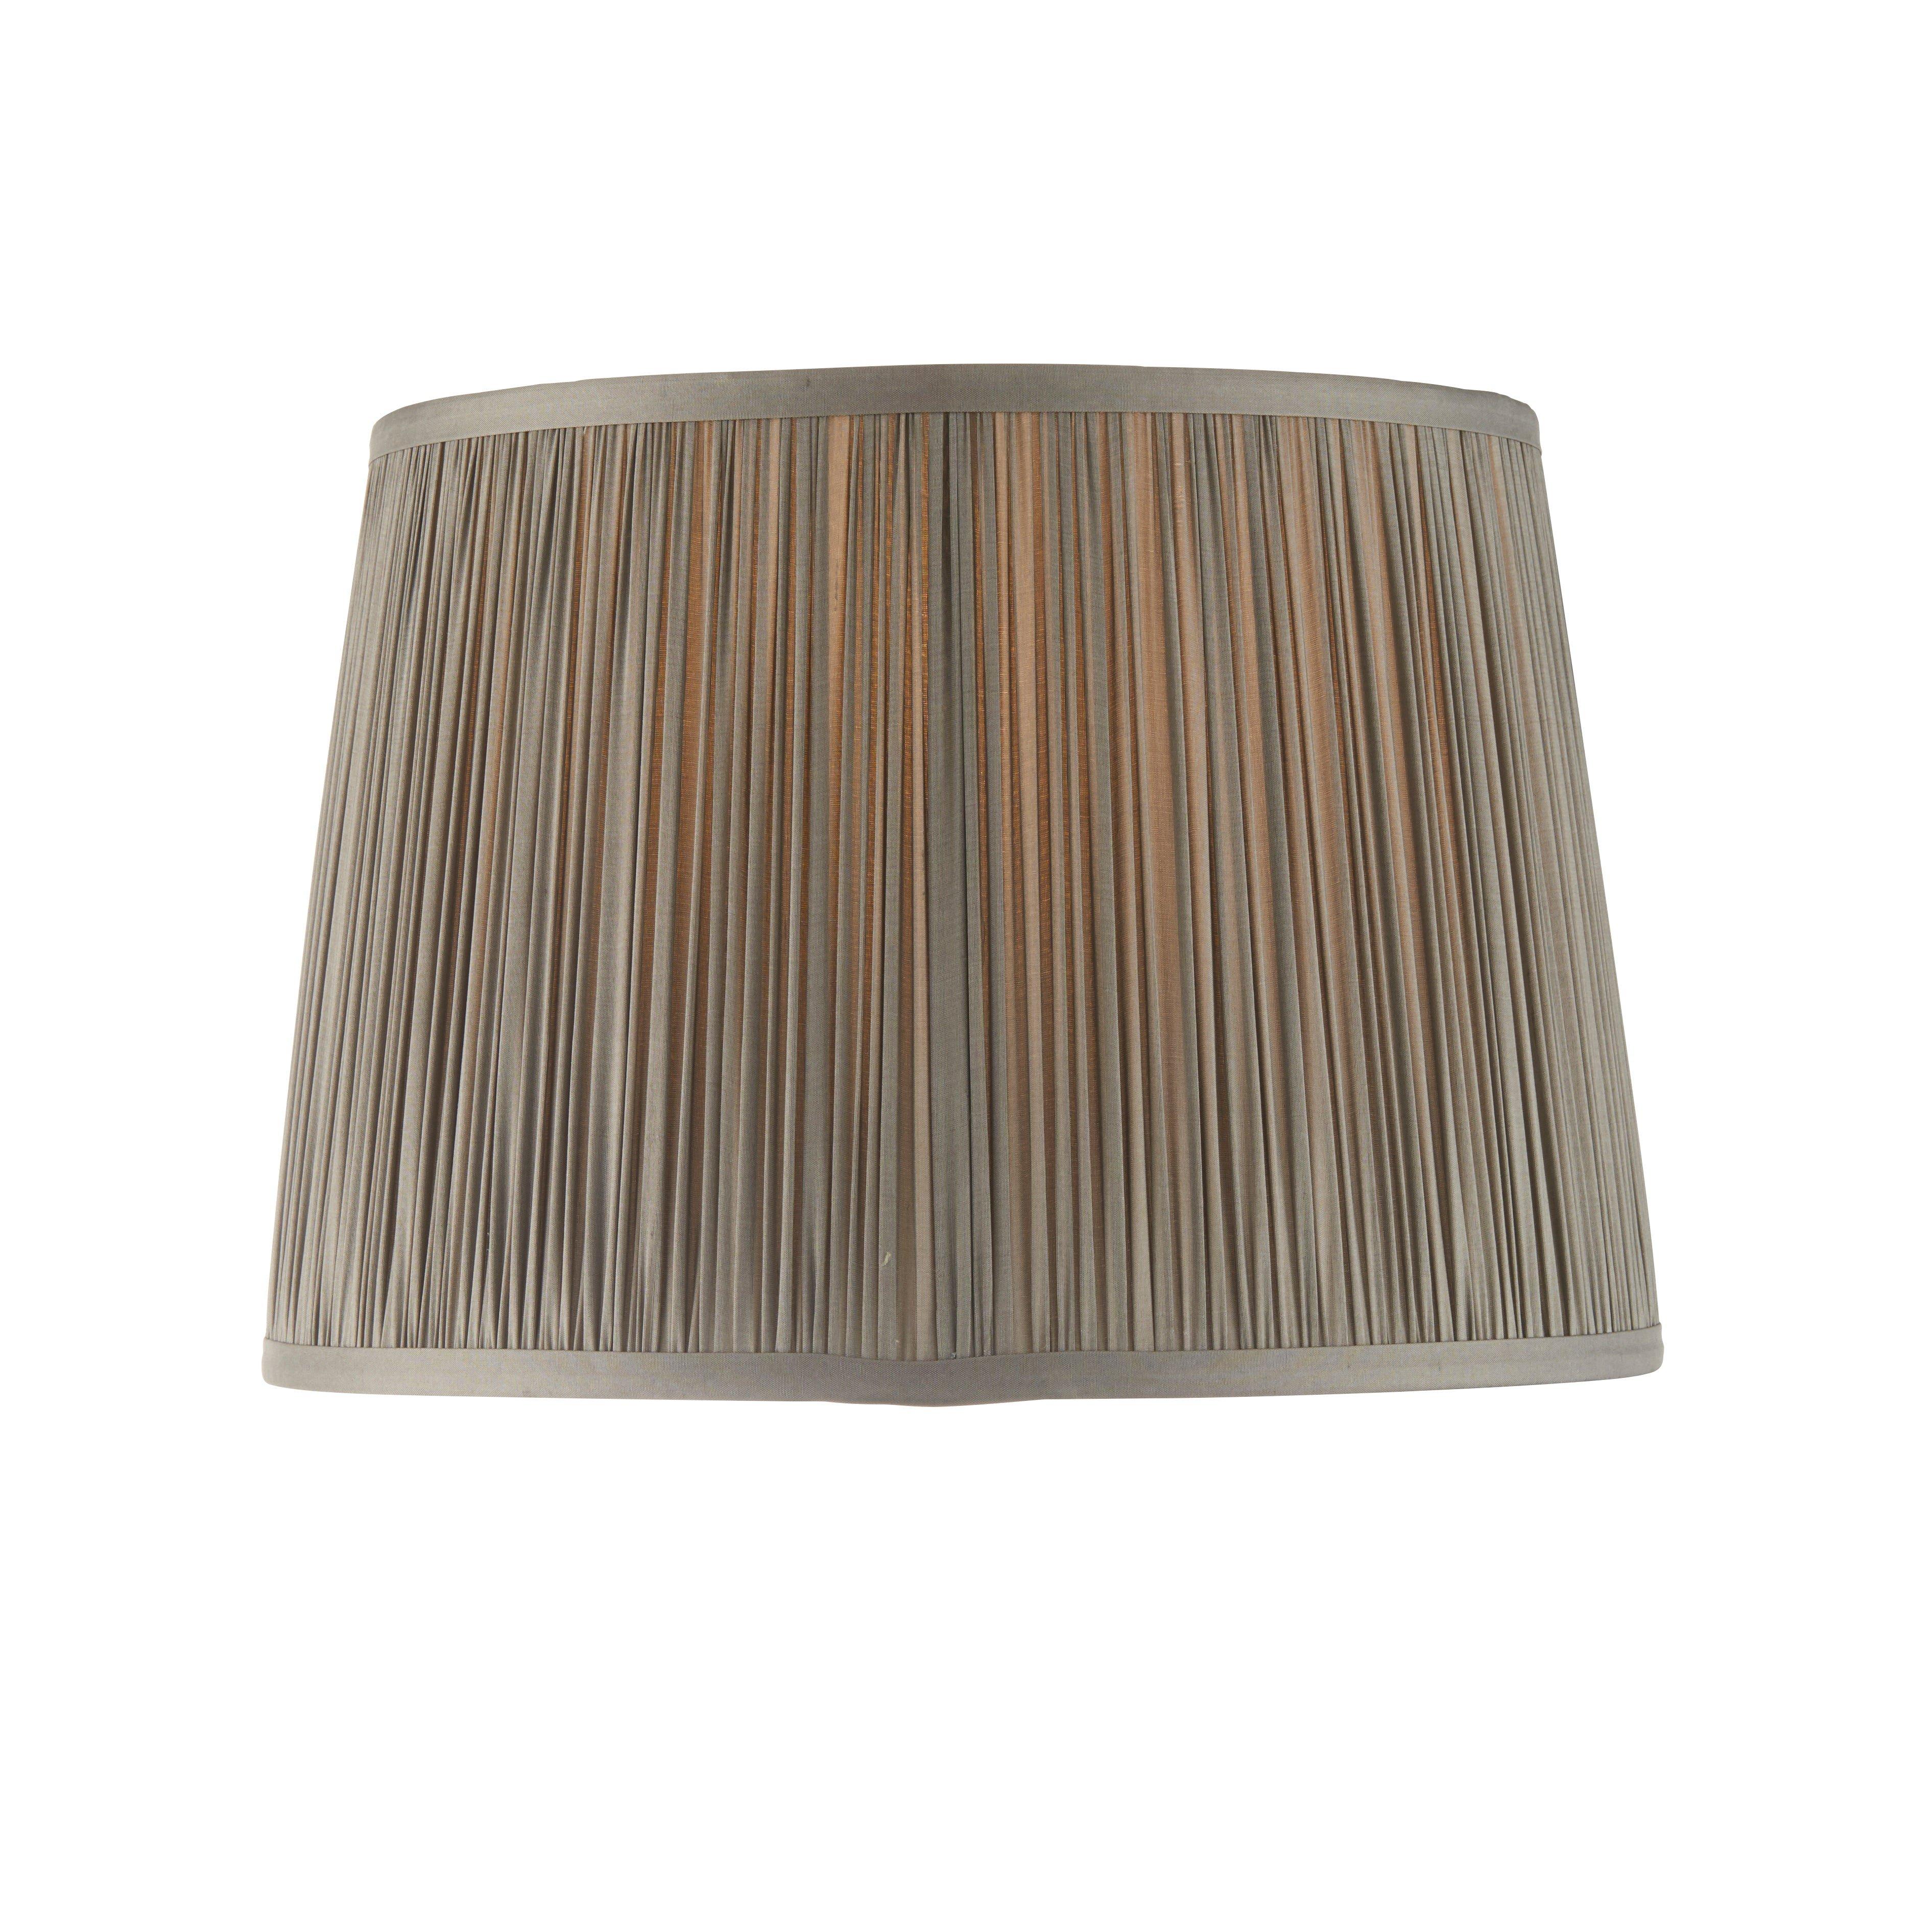 Tapered Cylinder Lamp Shade - Charcoal Grey Silk - 60W E27 or B22 GLS - e10827